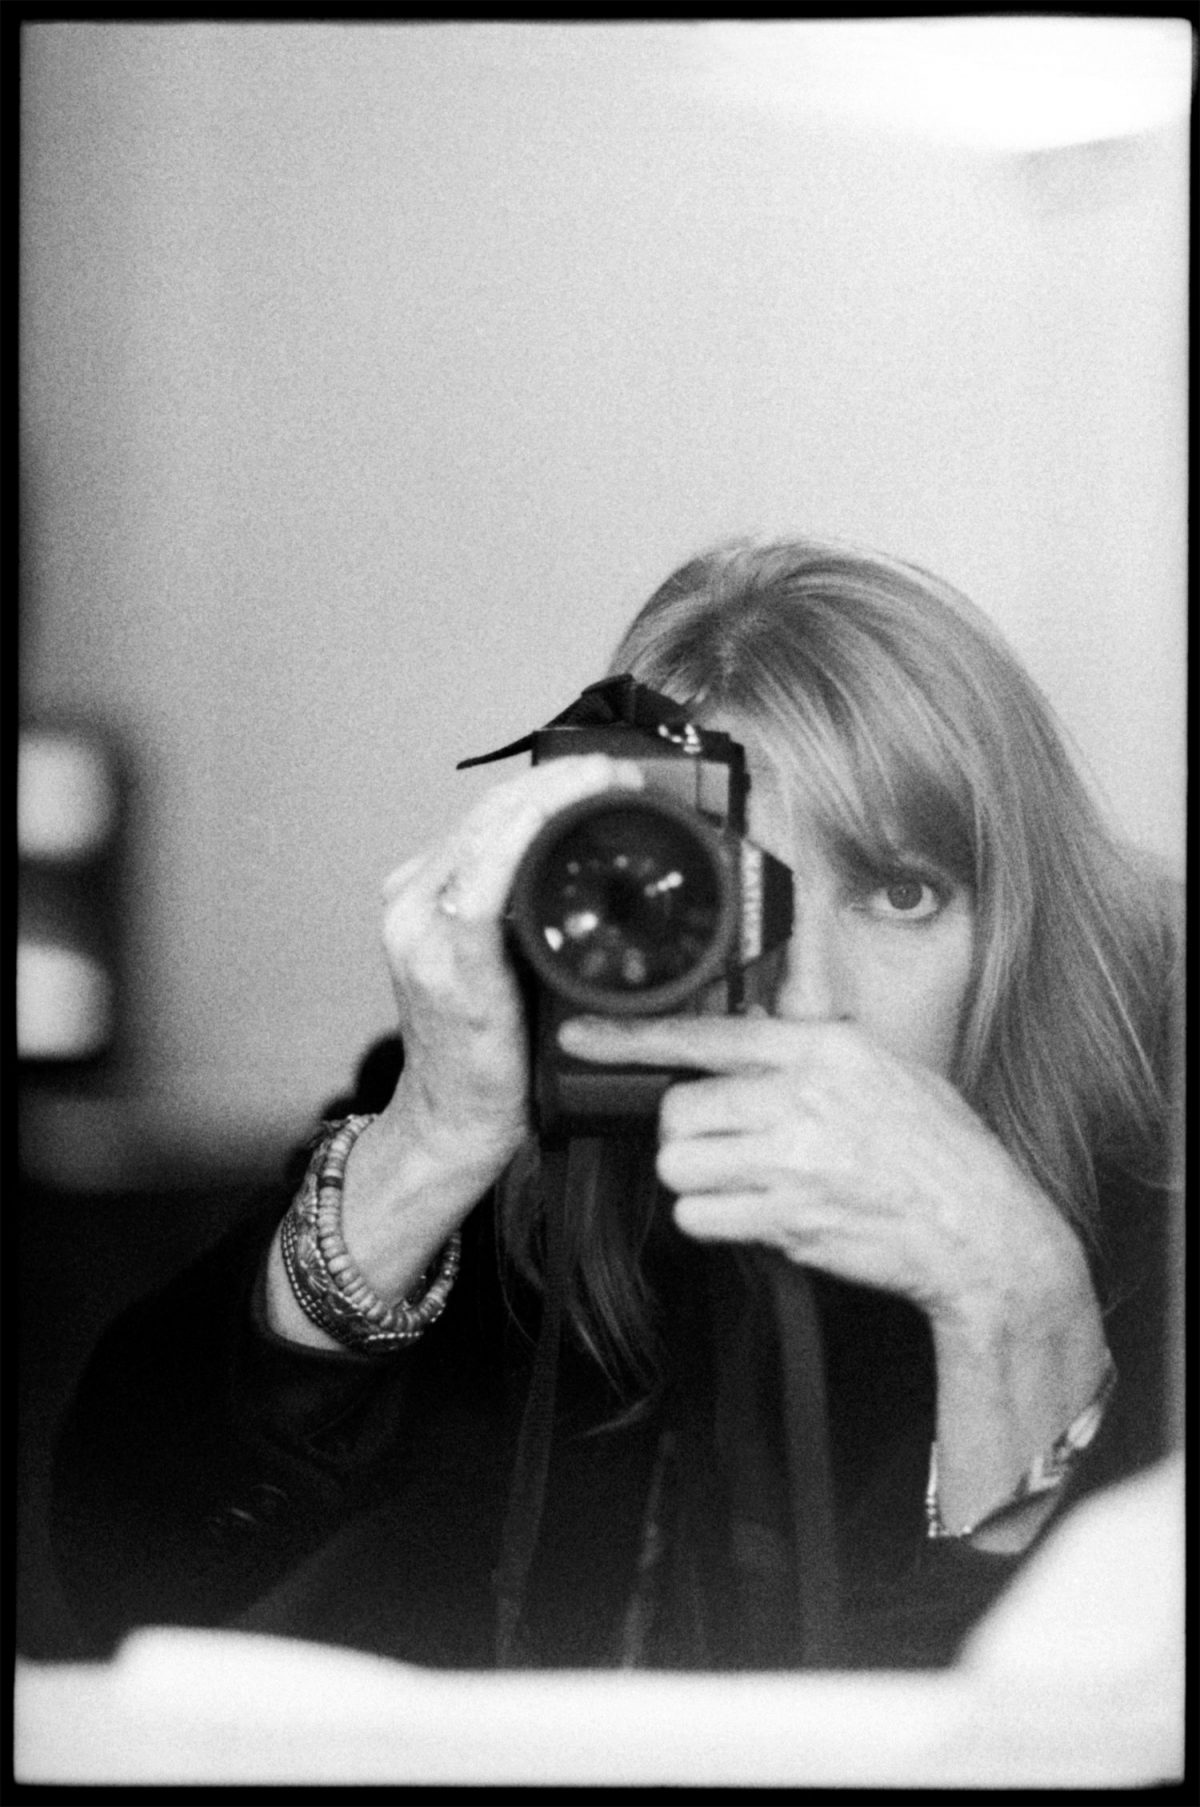 Linda McCartney, and her Photographs of Paul, The Beatles and Other Artists 